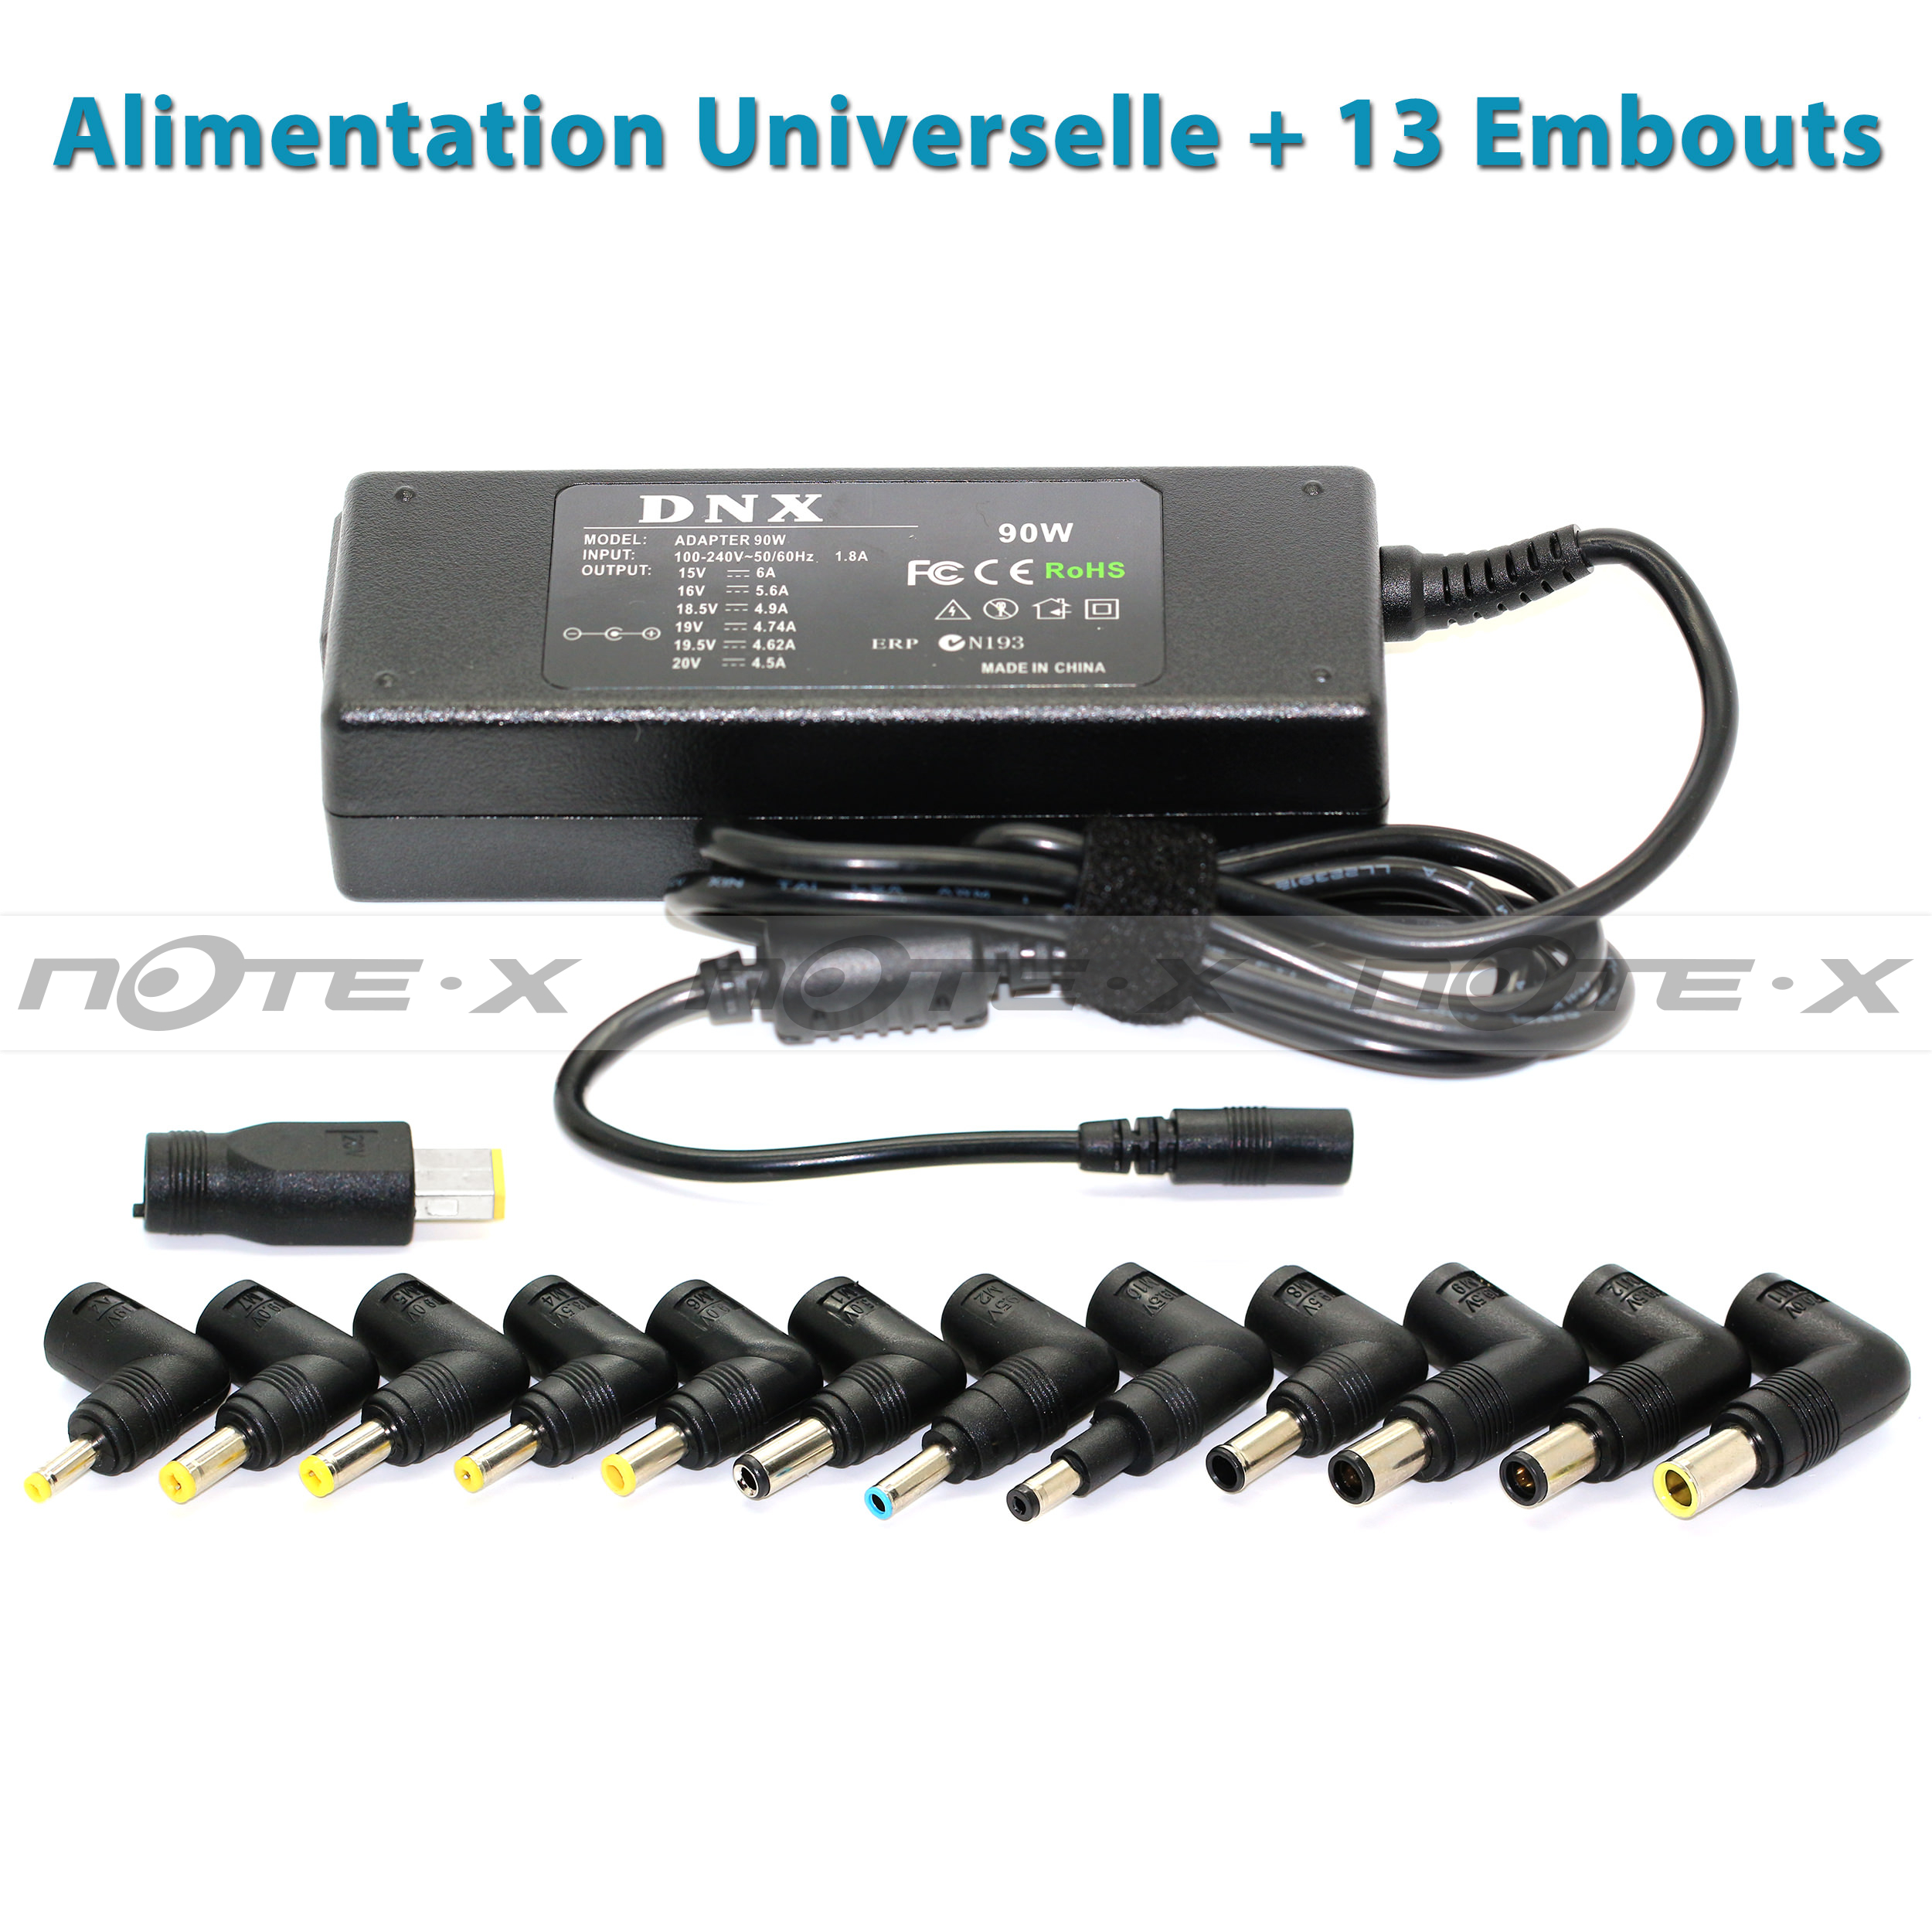 Chargeur Notebook Universel Hama pour voiture / 70W